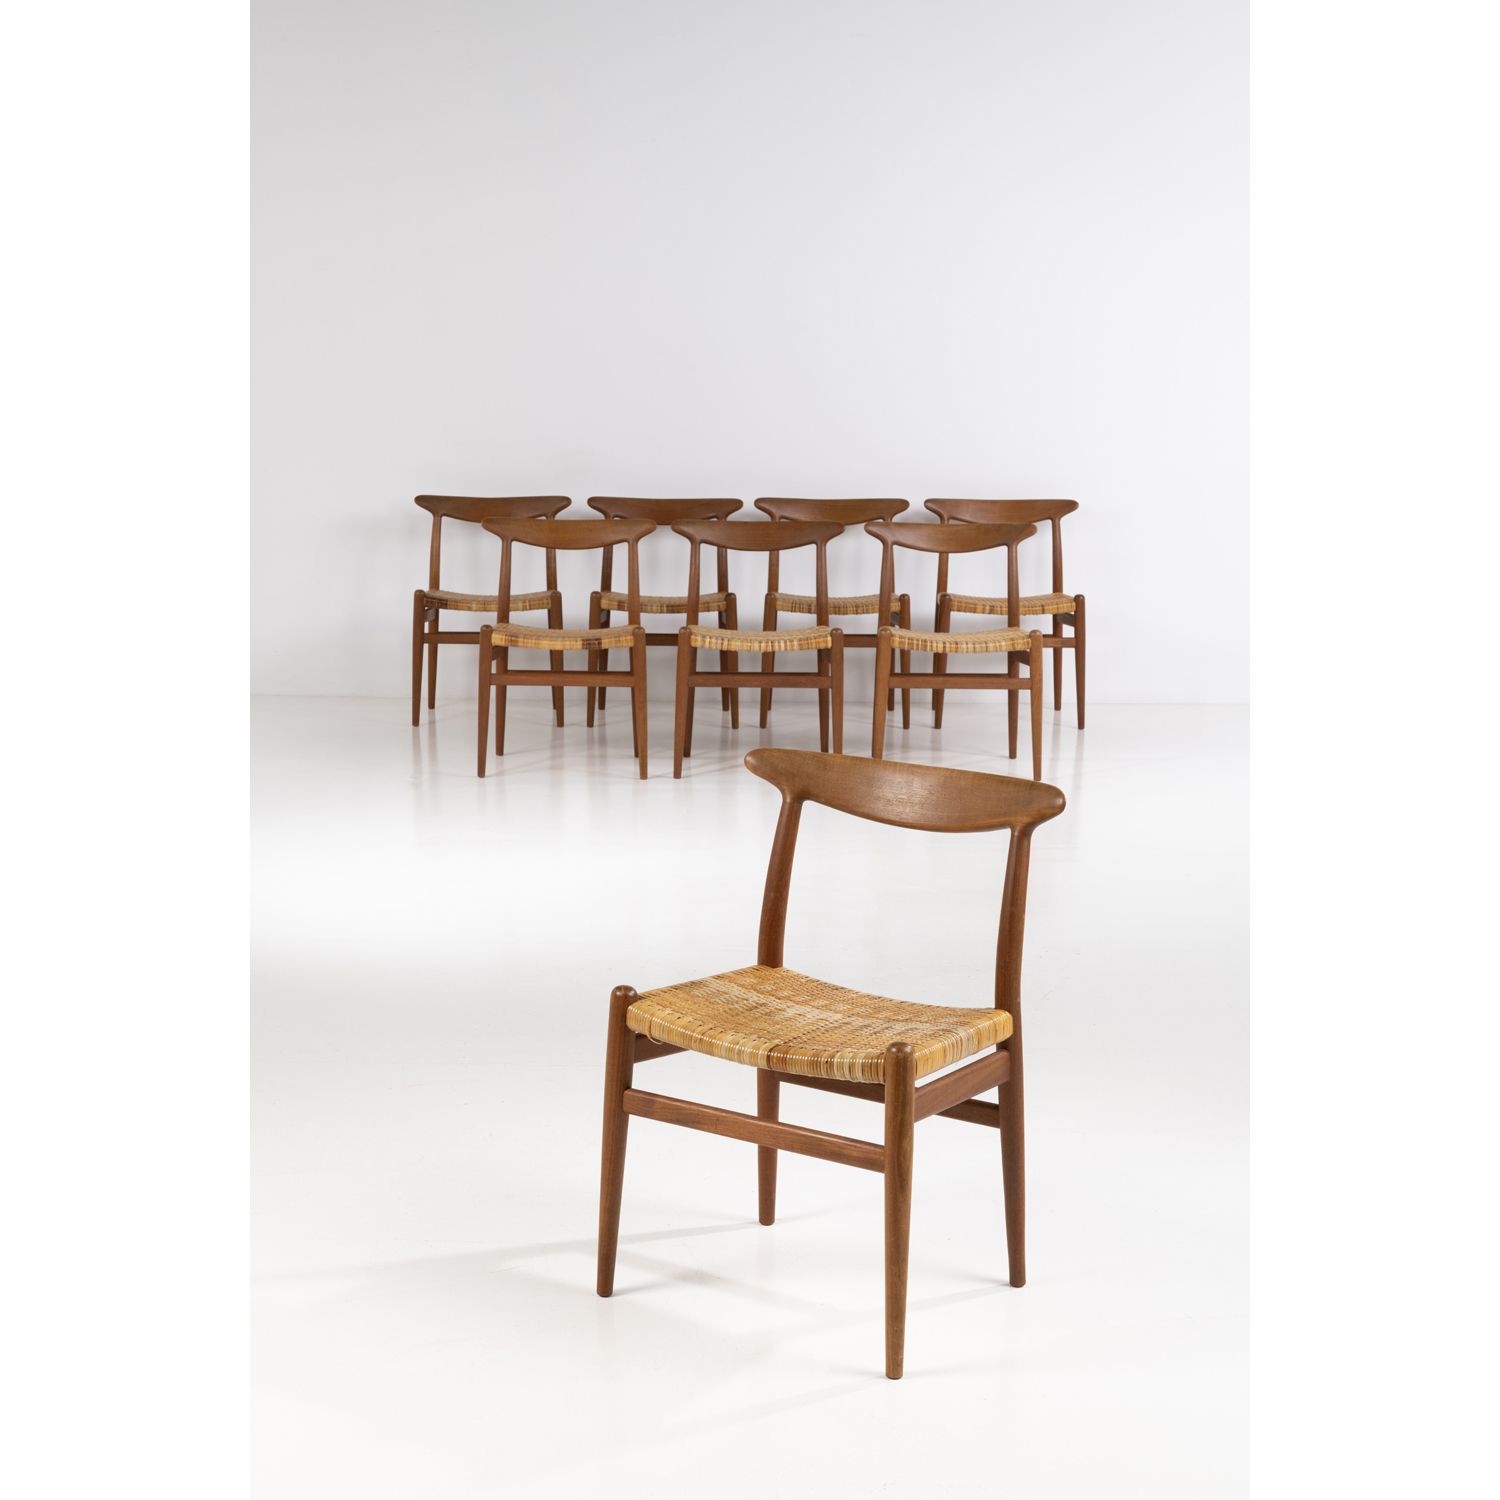 Null Hans J. Wegner (1914-2007)

Set of eight chairs

Teak and caning

Edited by&hellip;